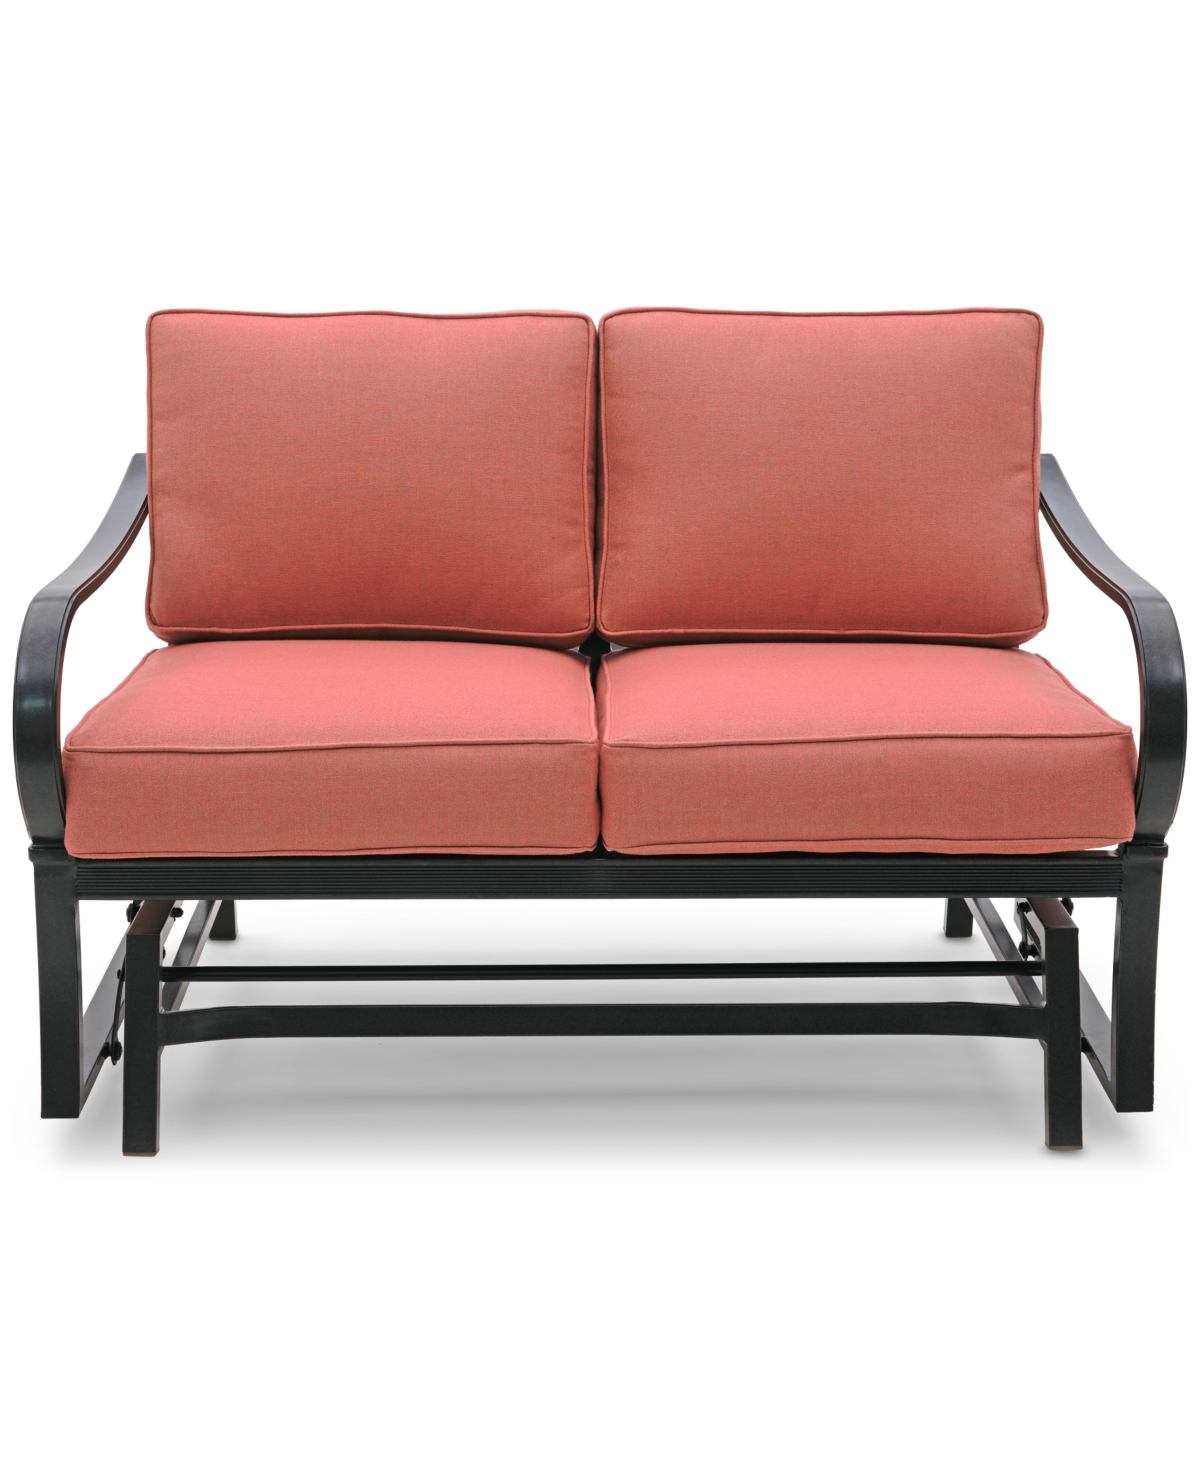 Agio St Croix Outdoor Loveseat Glider In Peony Brick Red